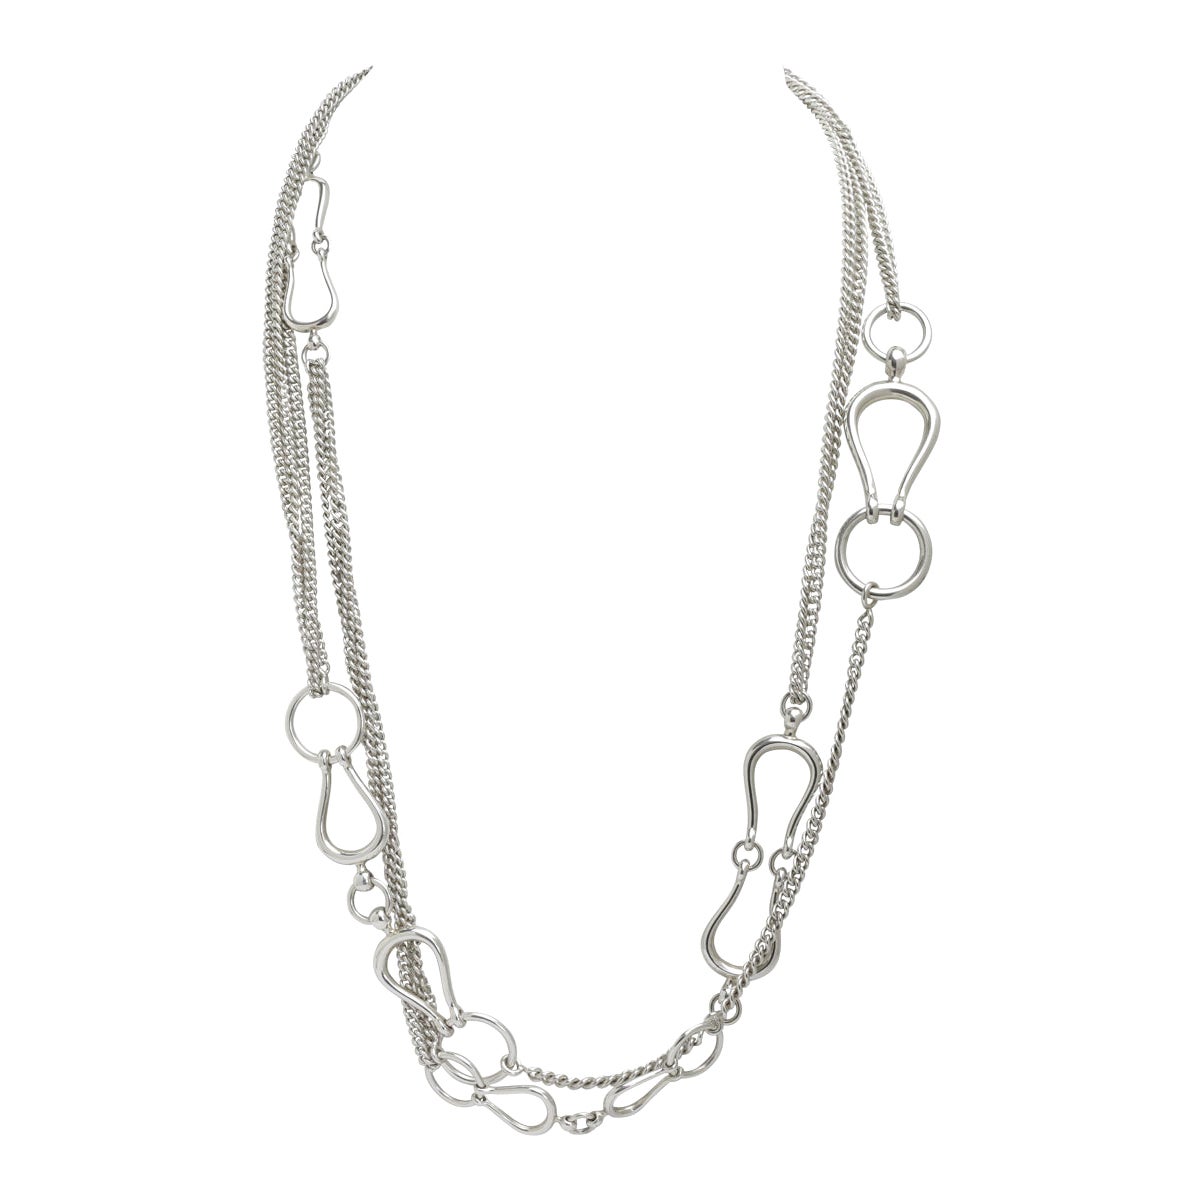 Hermes Sterling Silver Horsebit Chain Necklace with Hermes Box